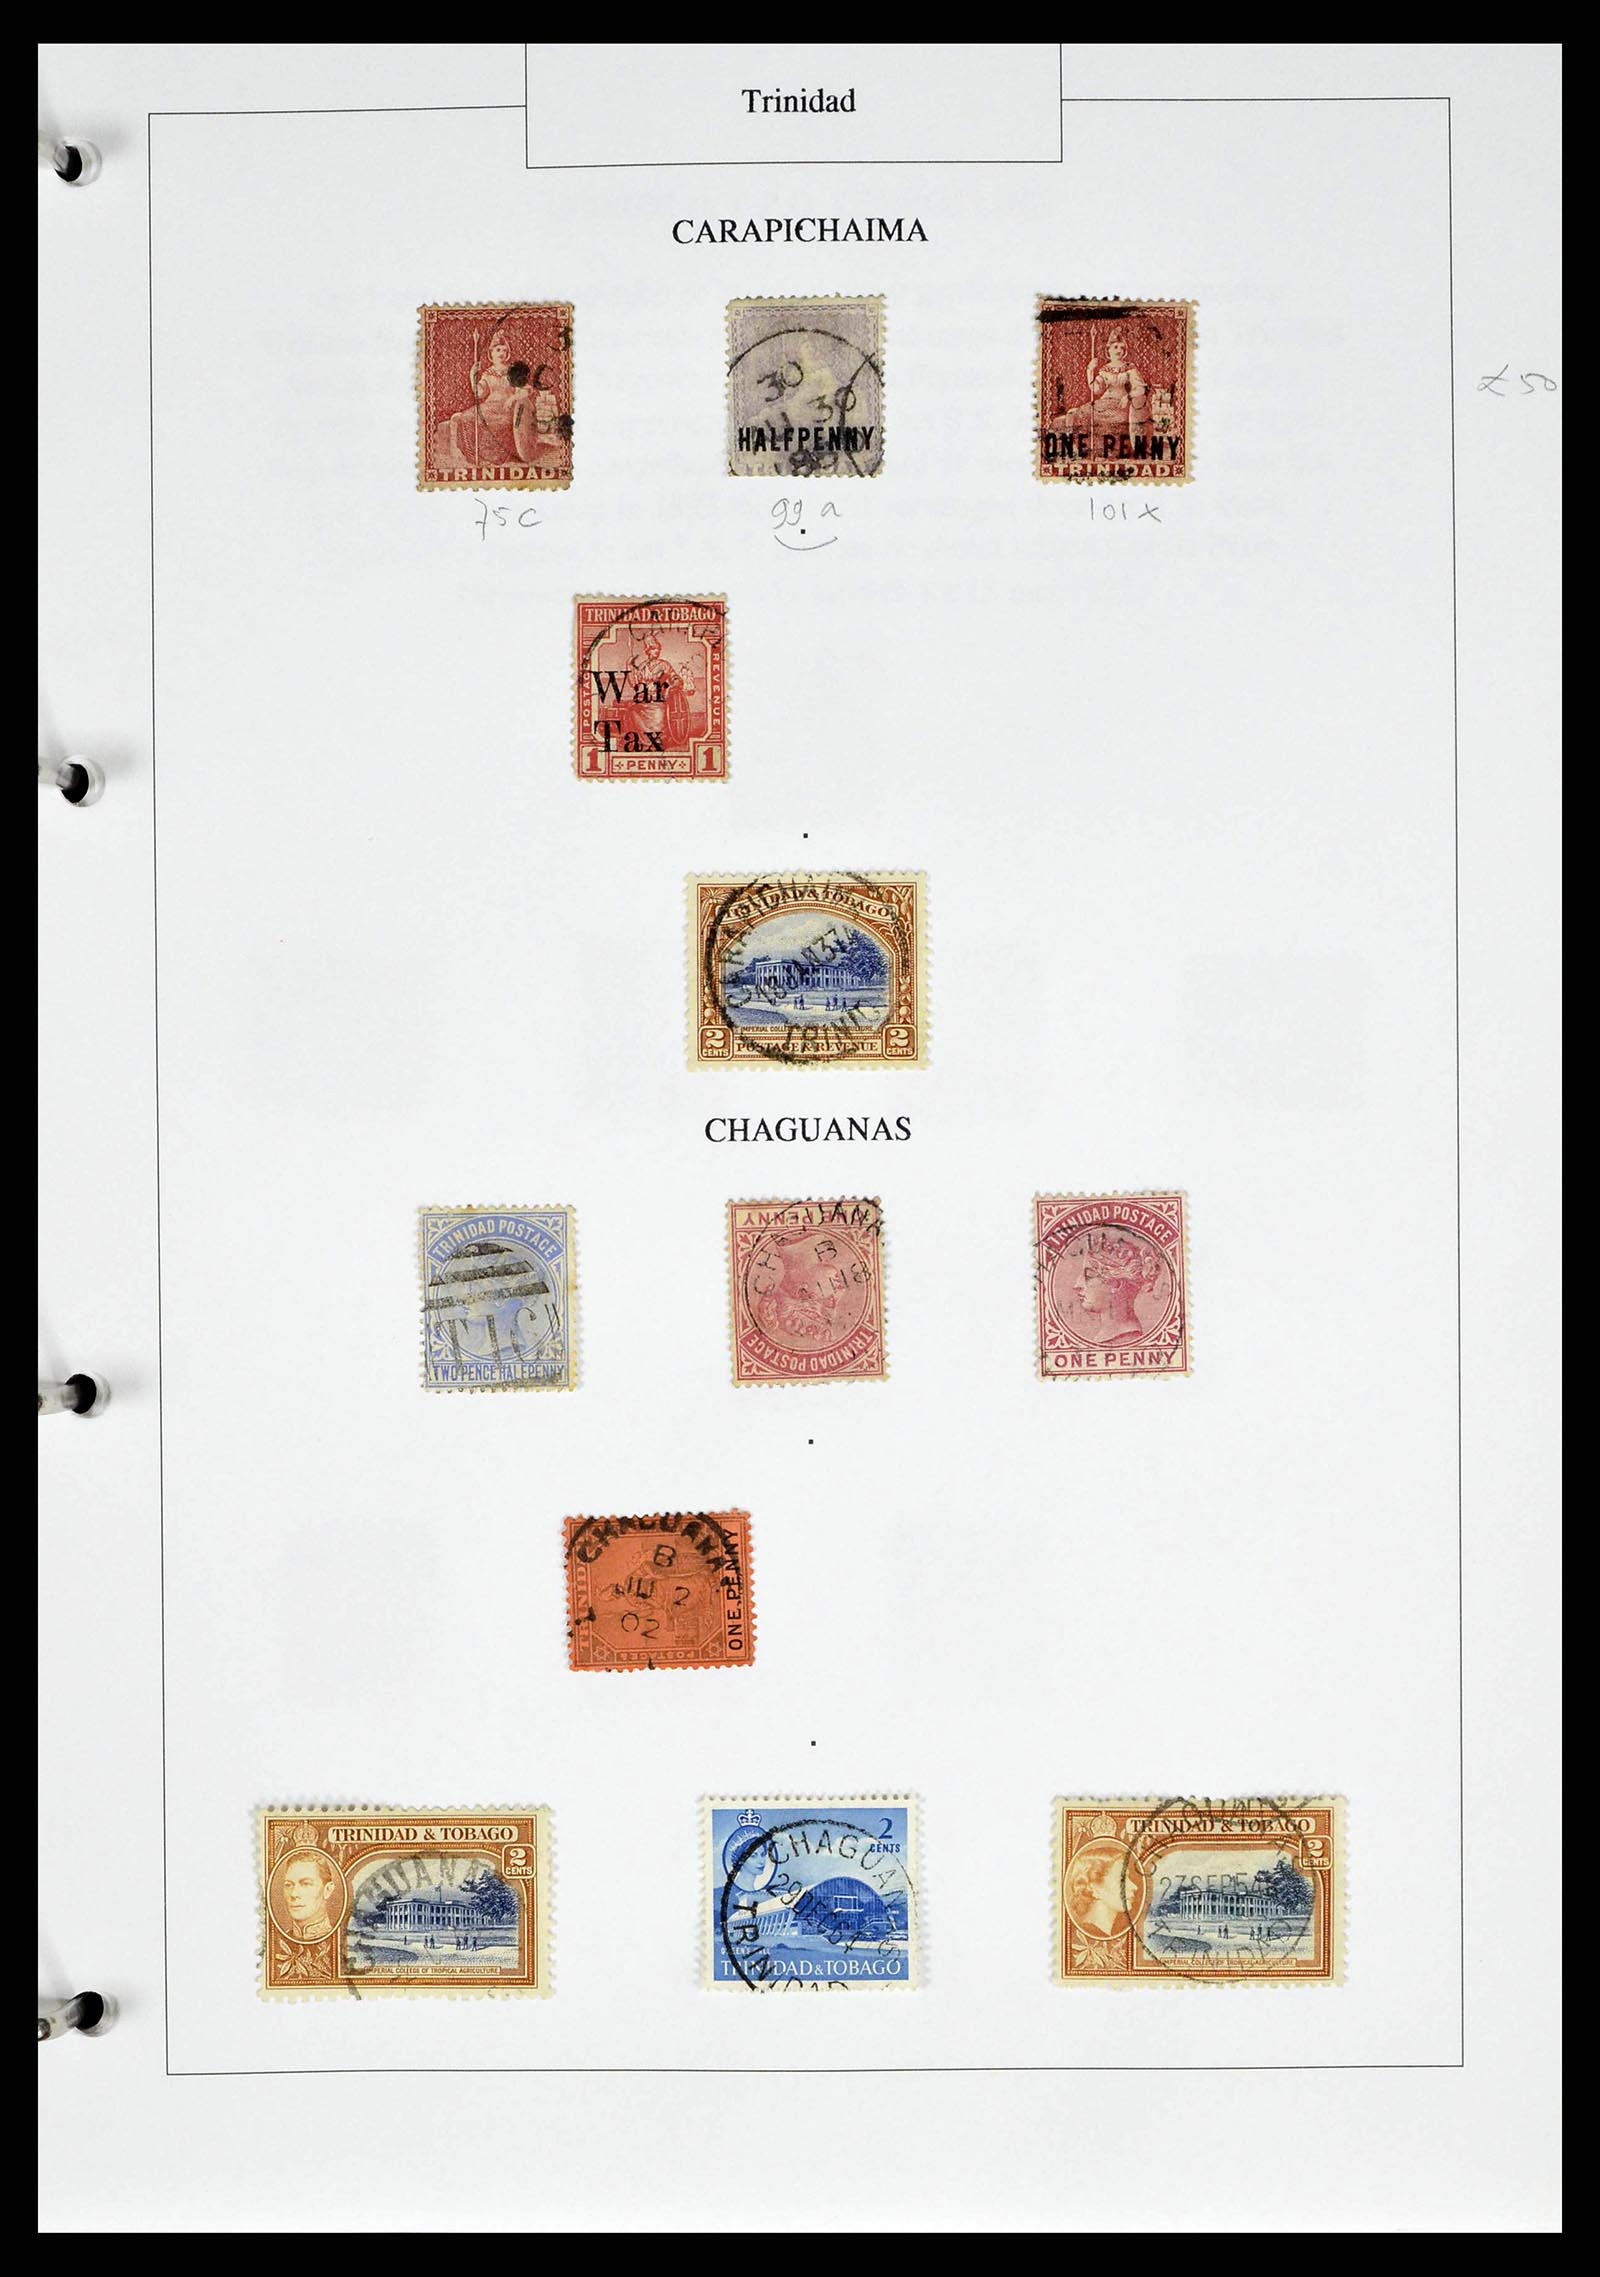 38481 0019 - Stamp collection 38481 Trinidad and Tobago cancels 1859-1960.